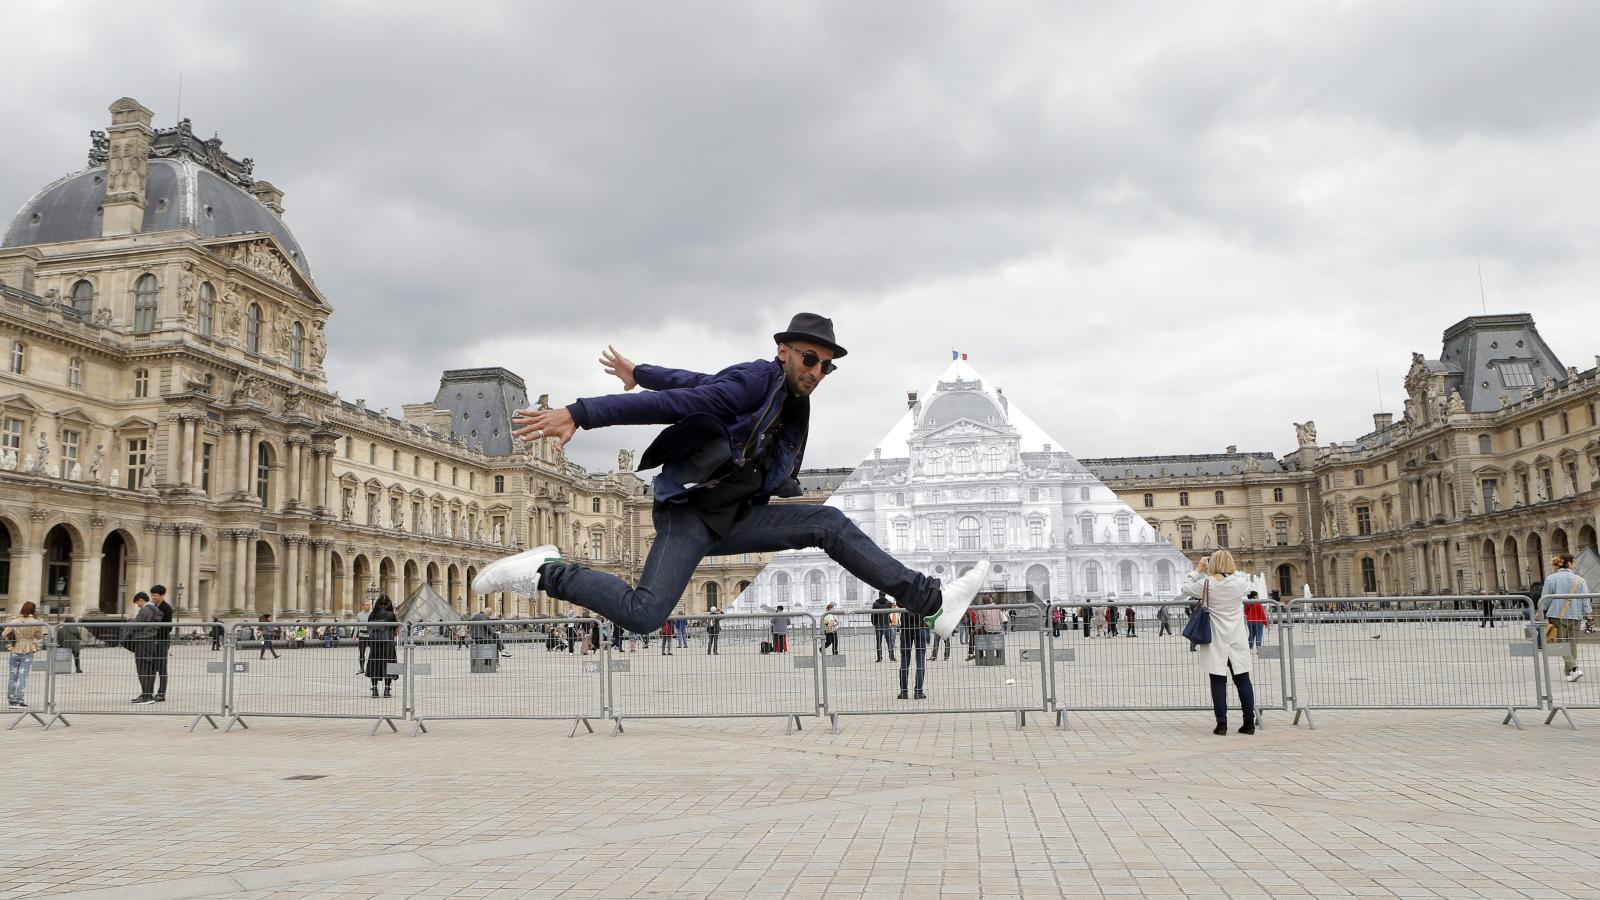 Artist Jr Made The Pyramid At Louvre Museum In Paris Disappear